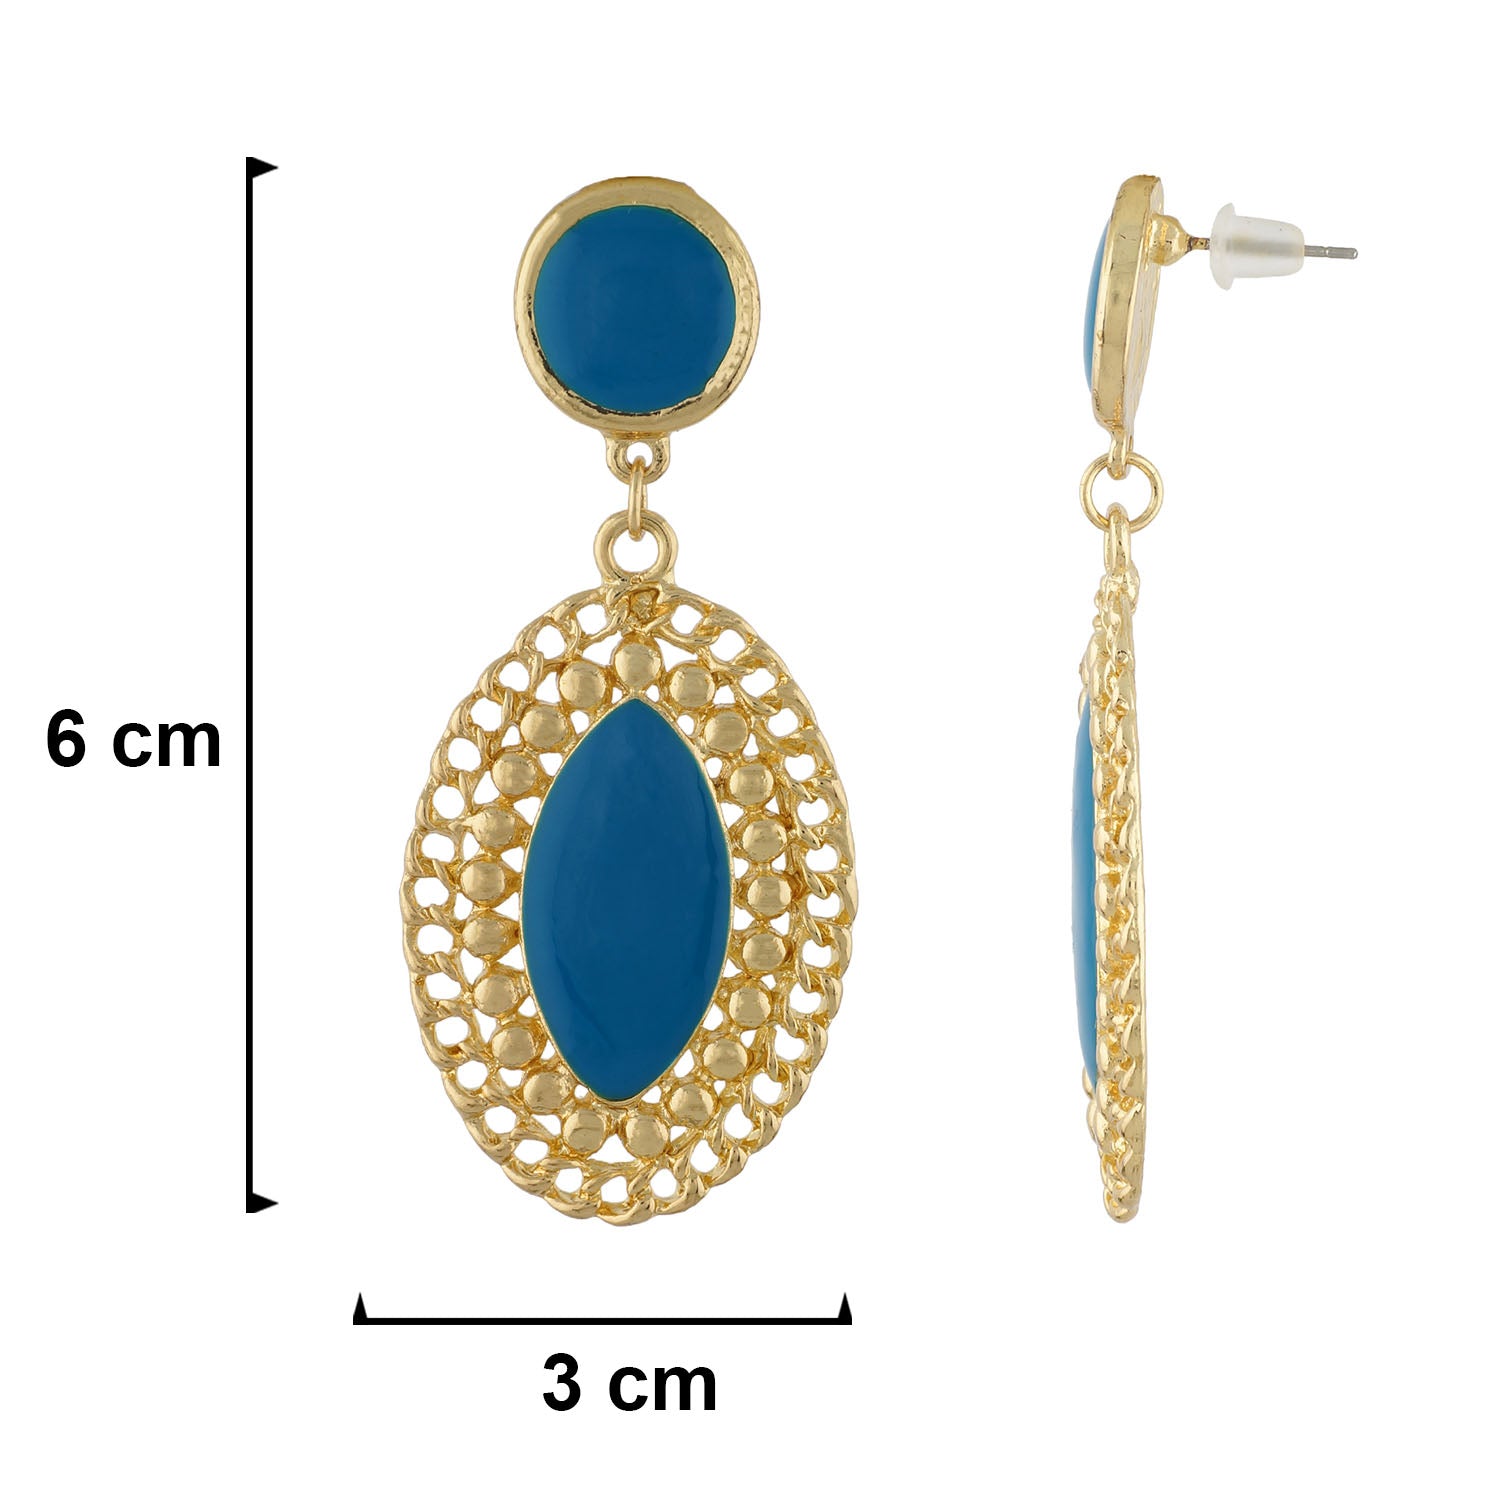 Stylish Blue and Gold Colour Oval Shape Enamel Enhanced Earring for Girls and Women